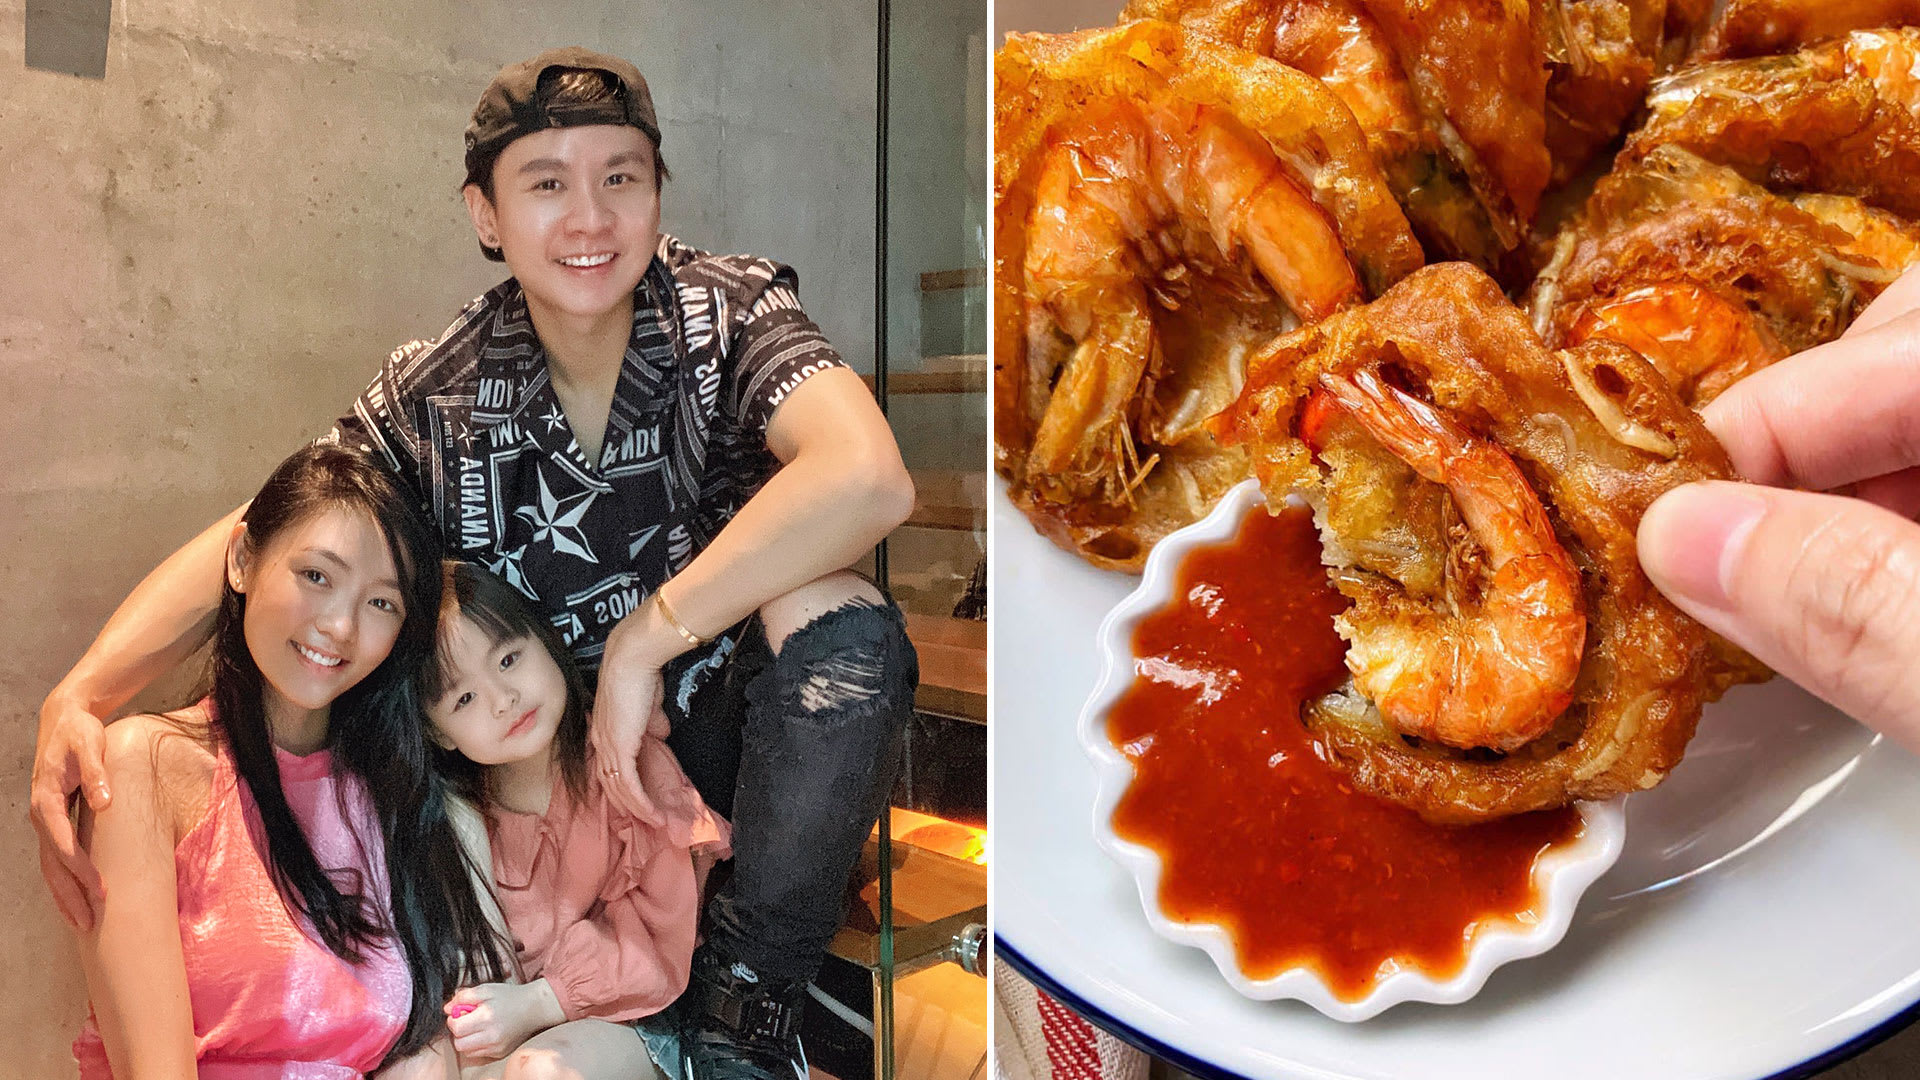 Flight Attendant & Fashion Designer Couple Sell Prawn Fritters After Covid-19 Disrupted Jobs